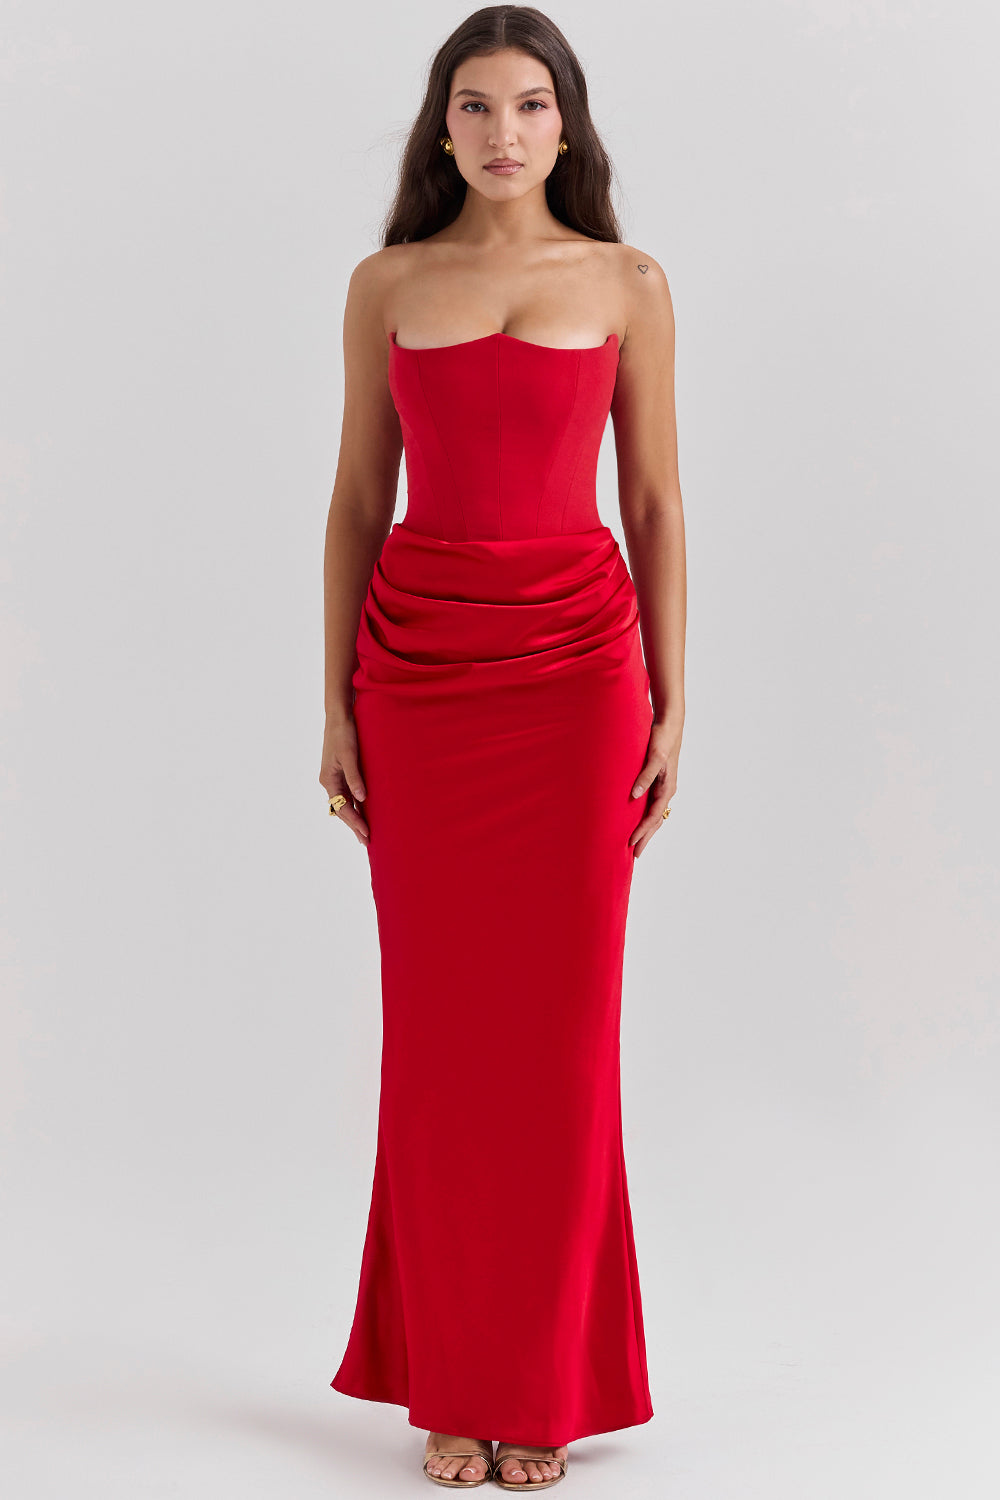 HOUSE OF CB Persephone Strapless Corset Dress in Red